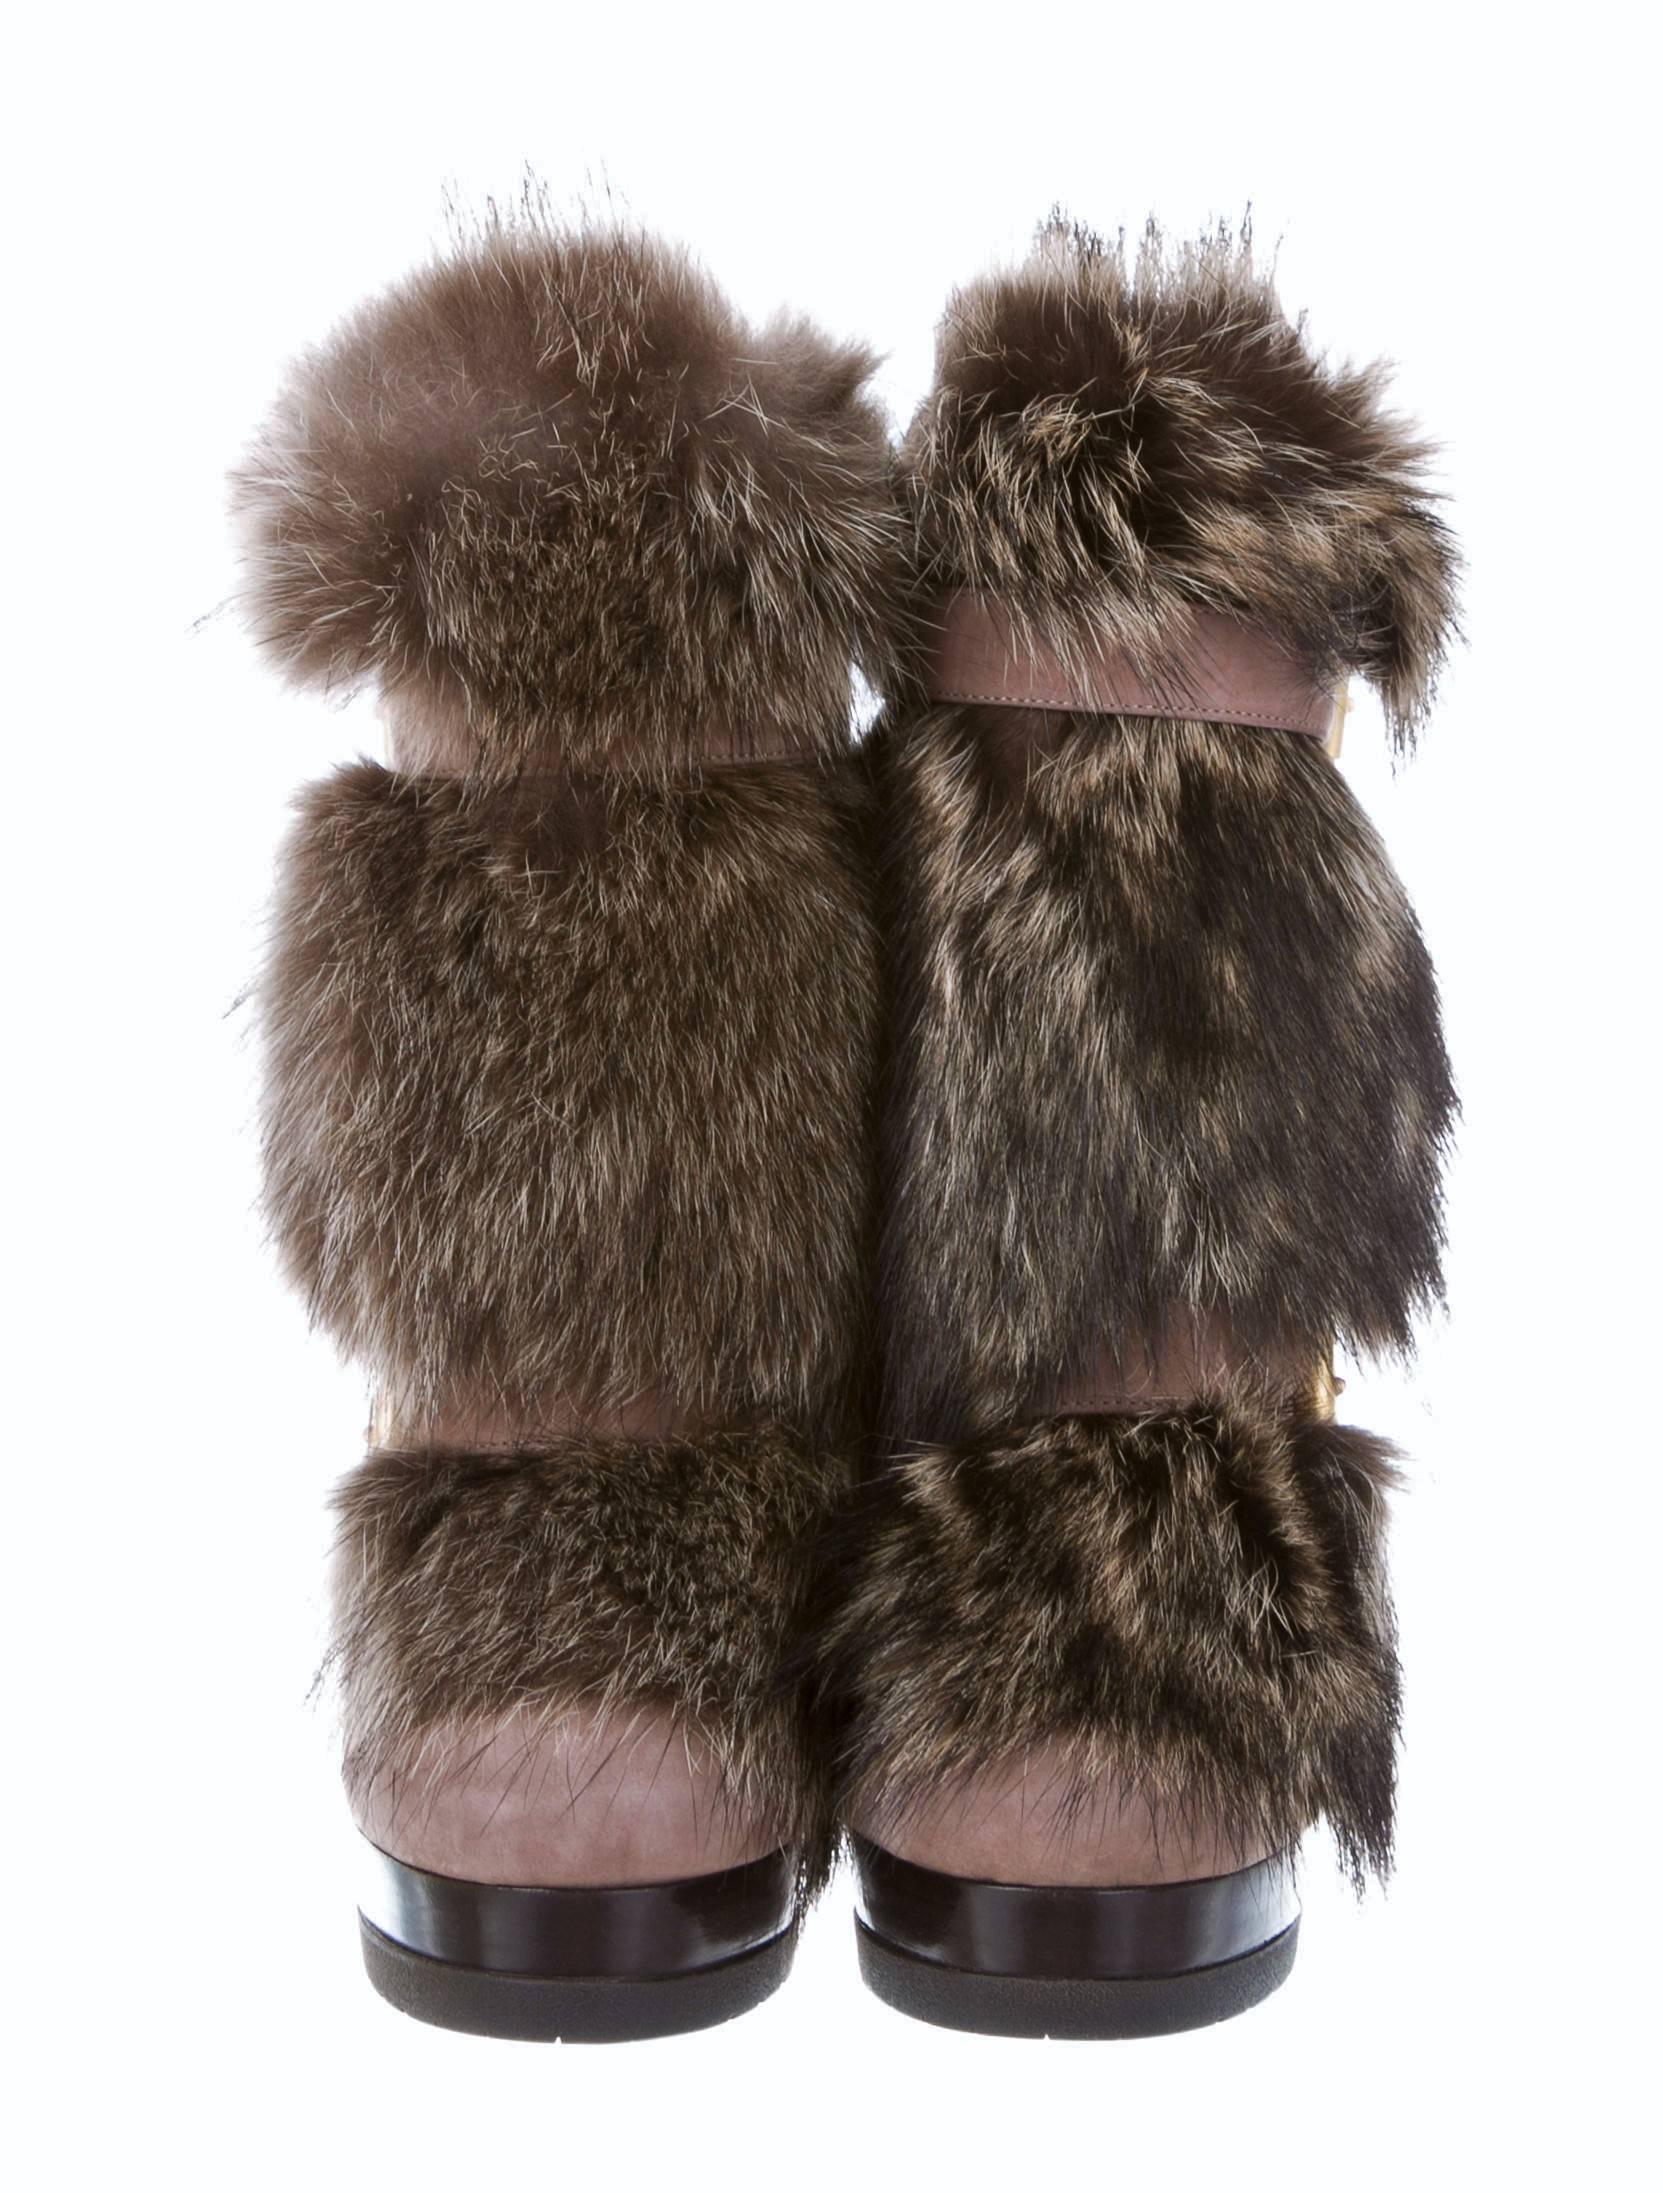 Fendi Fur Boots
Brand New
* Euro: 38.5  
* Stunning Beaver Fur Lines the Front and the Inside of the Boots
* Soft Taupe Nubuck Leather
* Zips up the Back
* 1.25